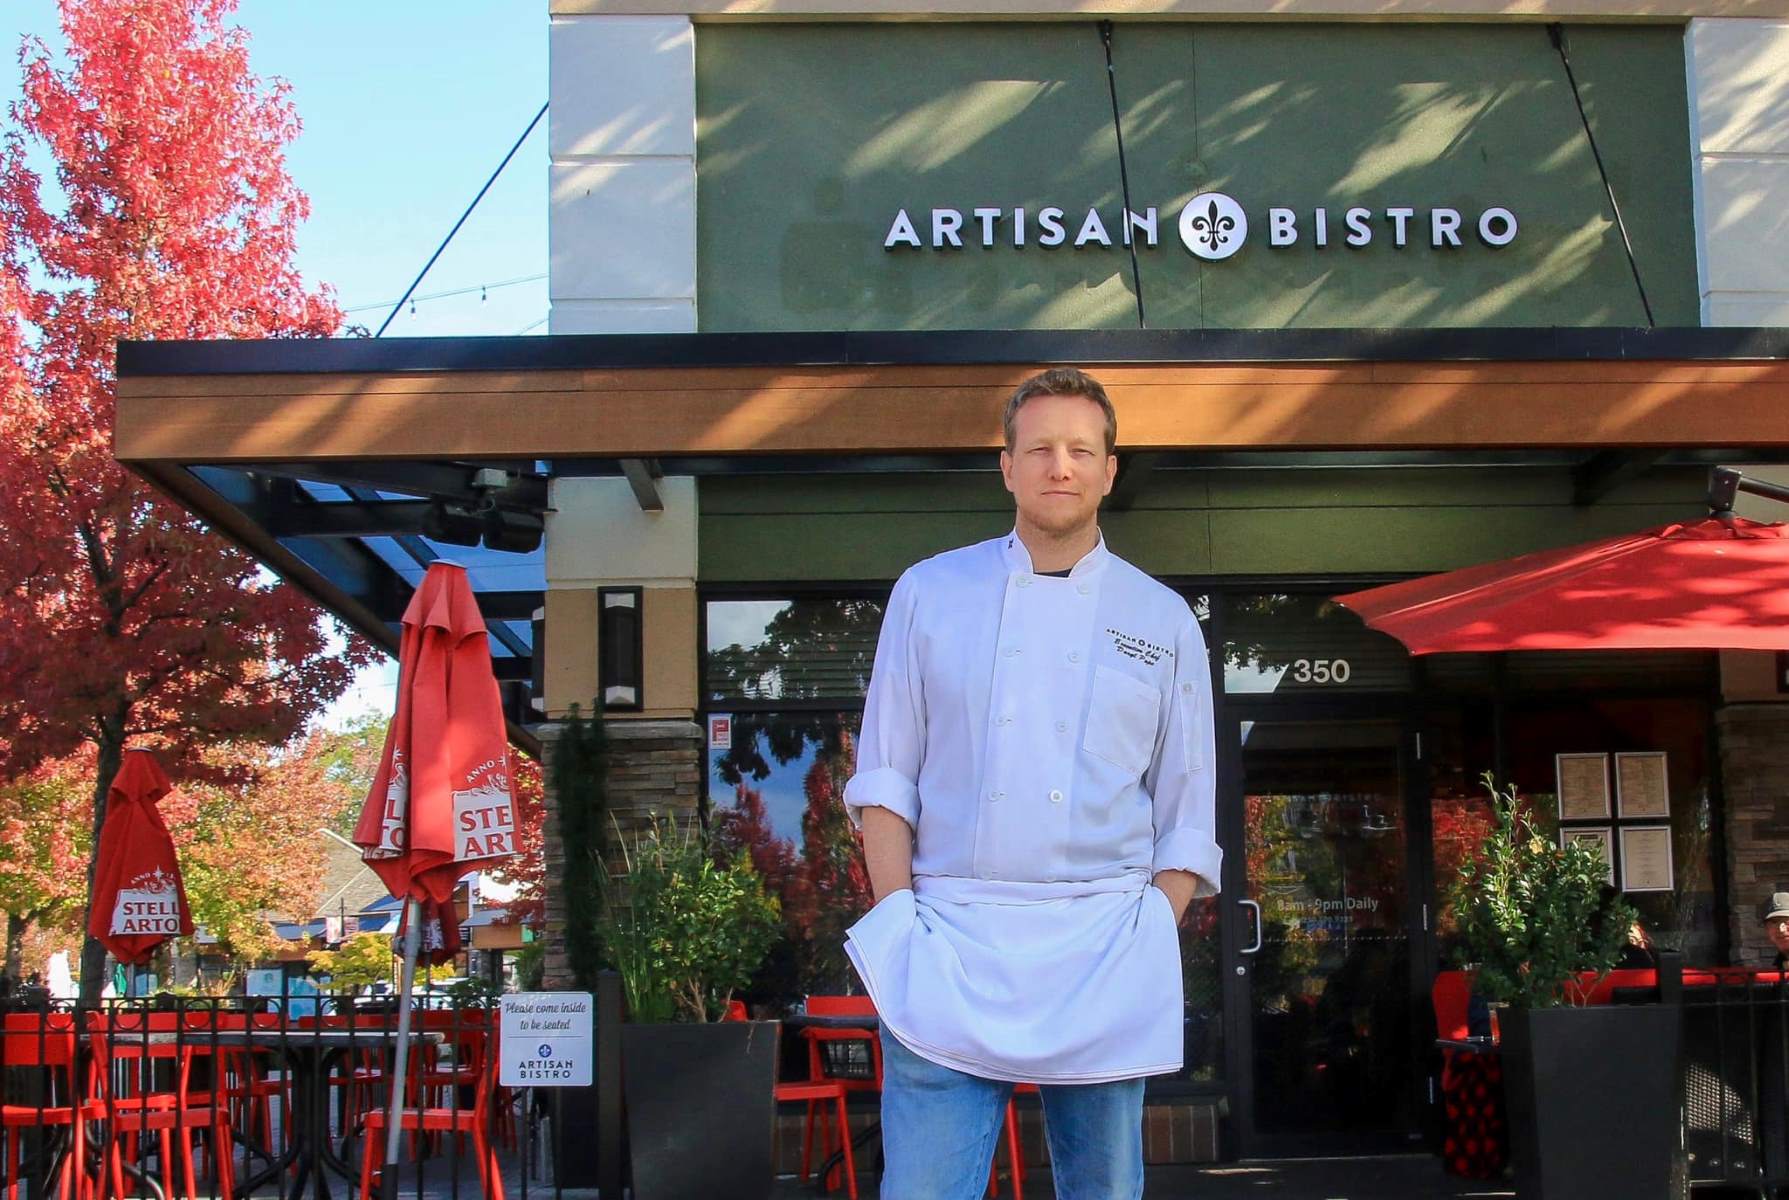 Artisan Bistro Introduces New Menu Selection Committee (MSC)